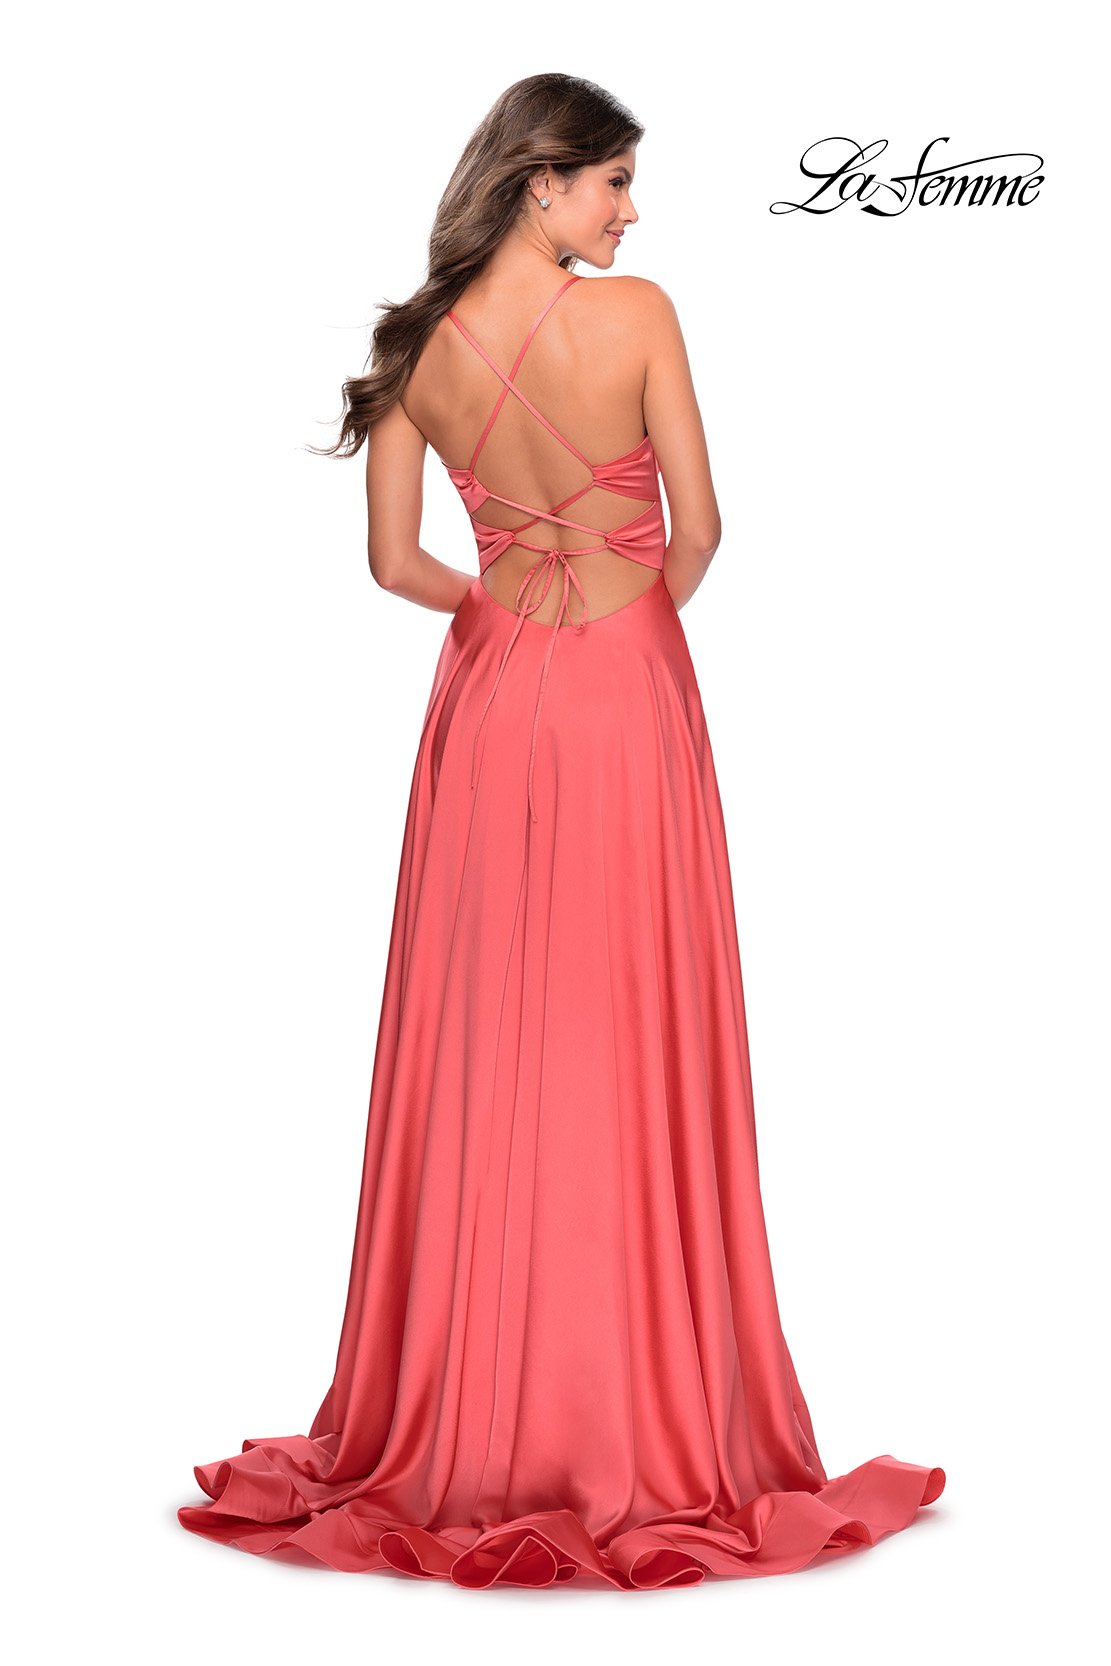 La Femme 28571 dress images in these colors: Coral, Royal Blue, Teal, Wine, Yellow.